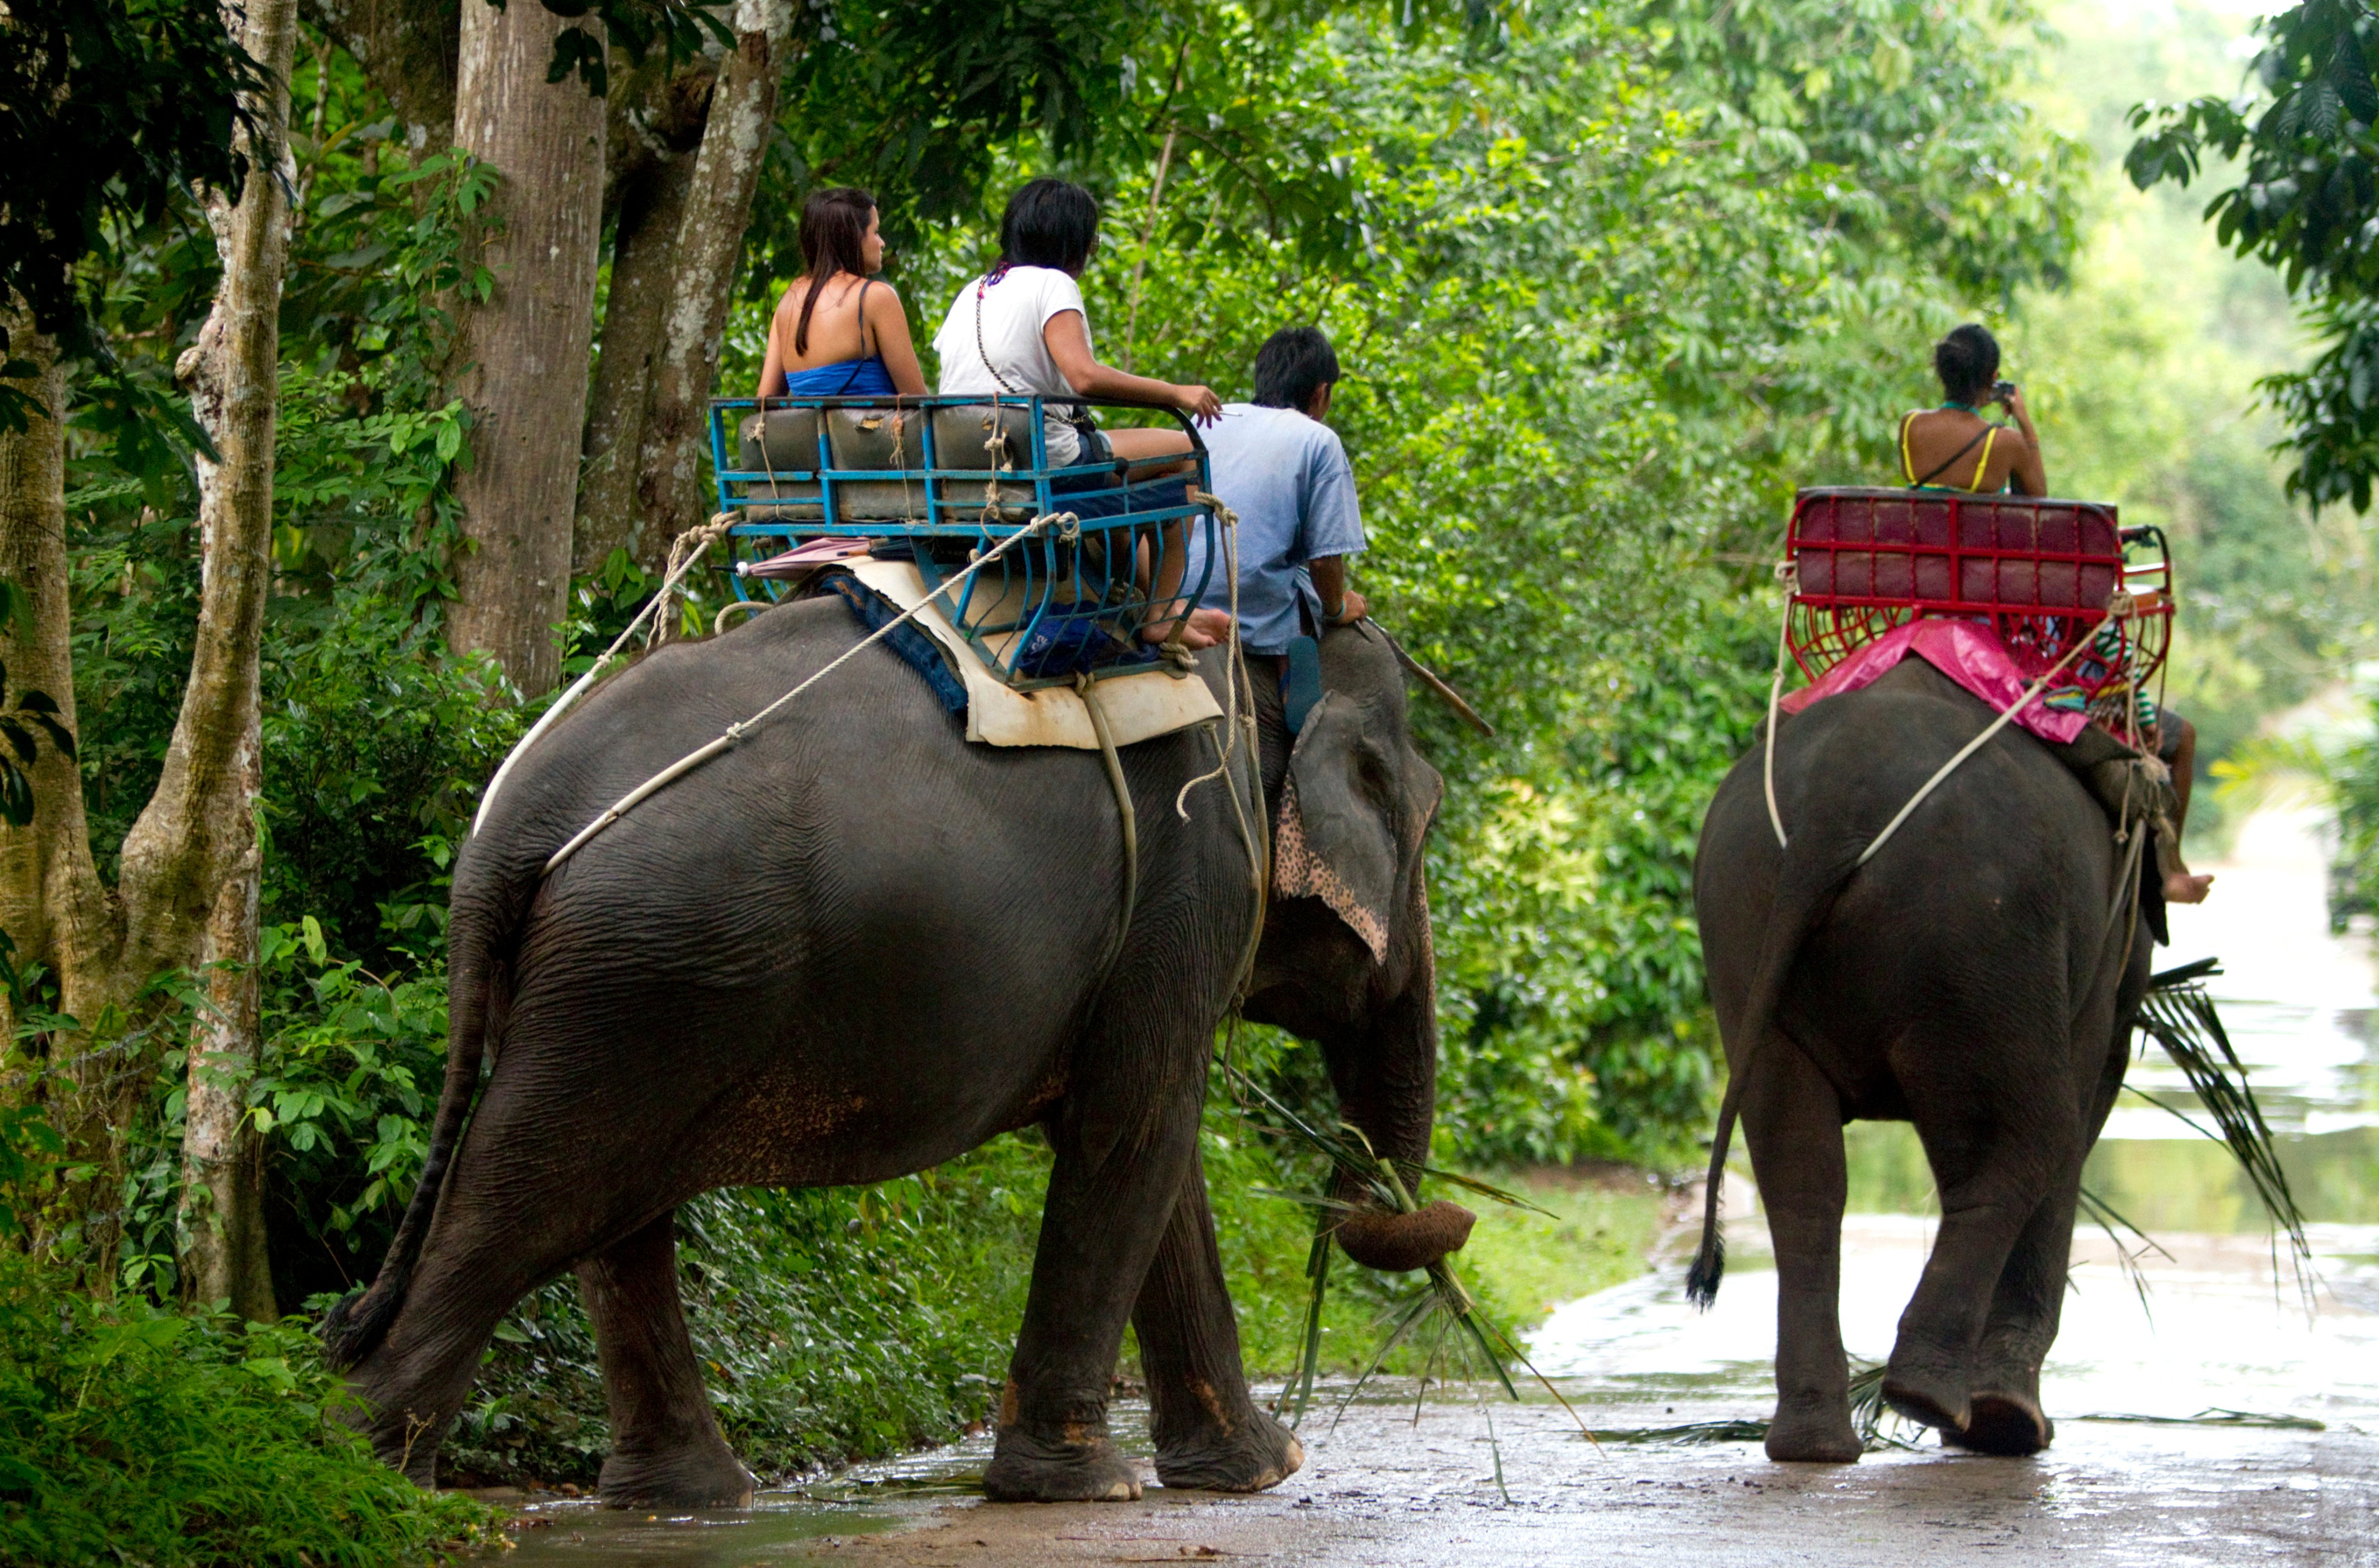 Tourists ride atop Asian elephants in Koh Samui, Thailand (Getty Images)